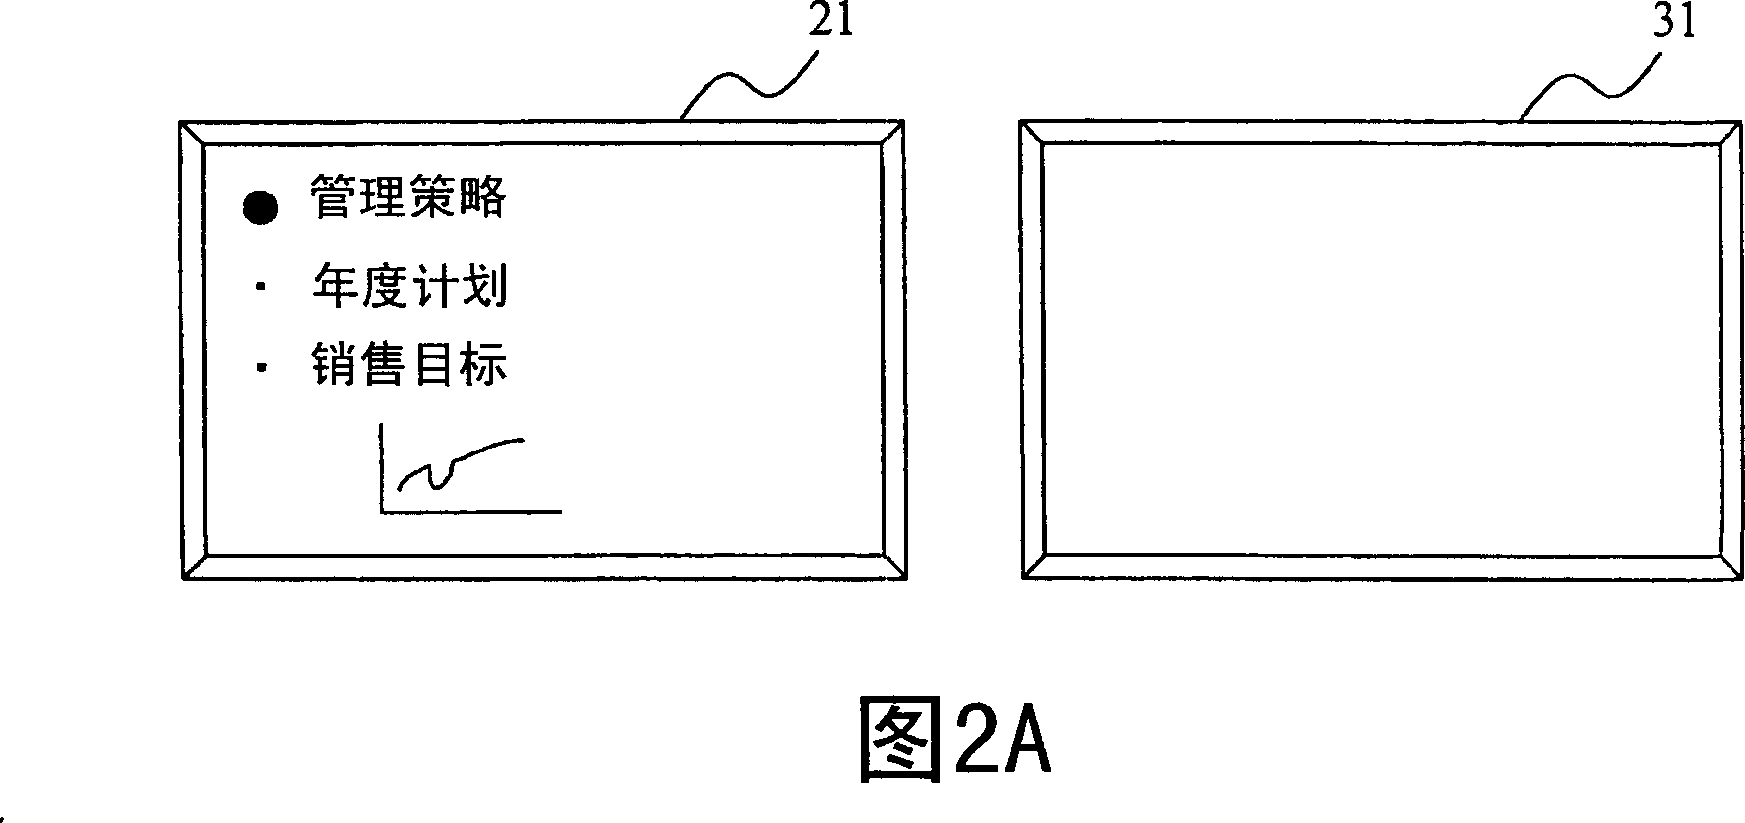 Electronic conference system, electronic conference support method, electronic conference control apparatus, and portable storage device